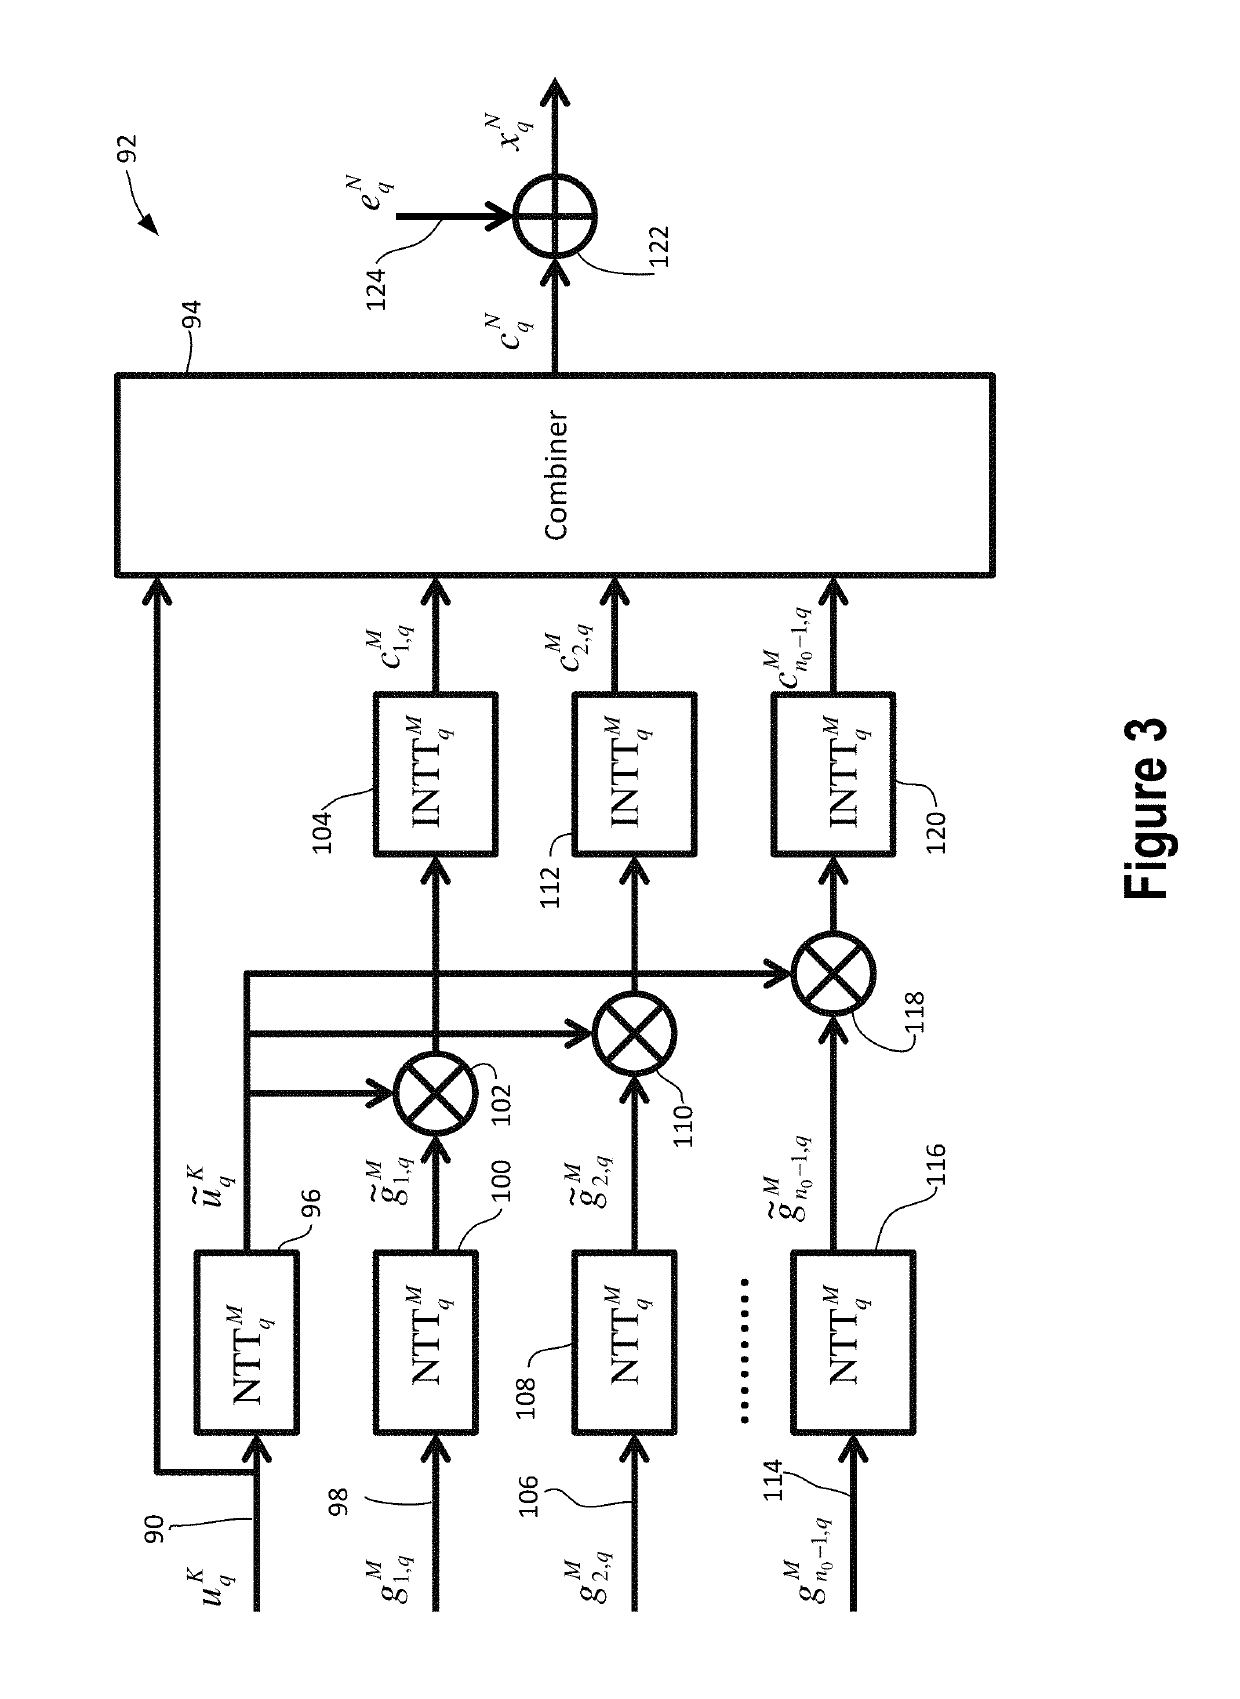 METHOD AND APPARATUS FOR ASYMMETRIC CRYPTOSYSTEM BASED ON QUASI-CYCLIC MODERATE DENSITY PARITY-CHECK CODES OVER GF(q)